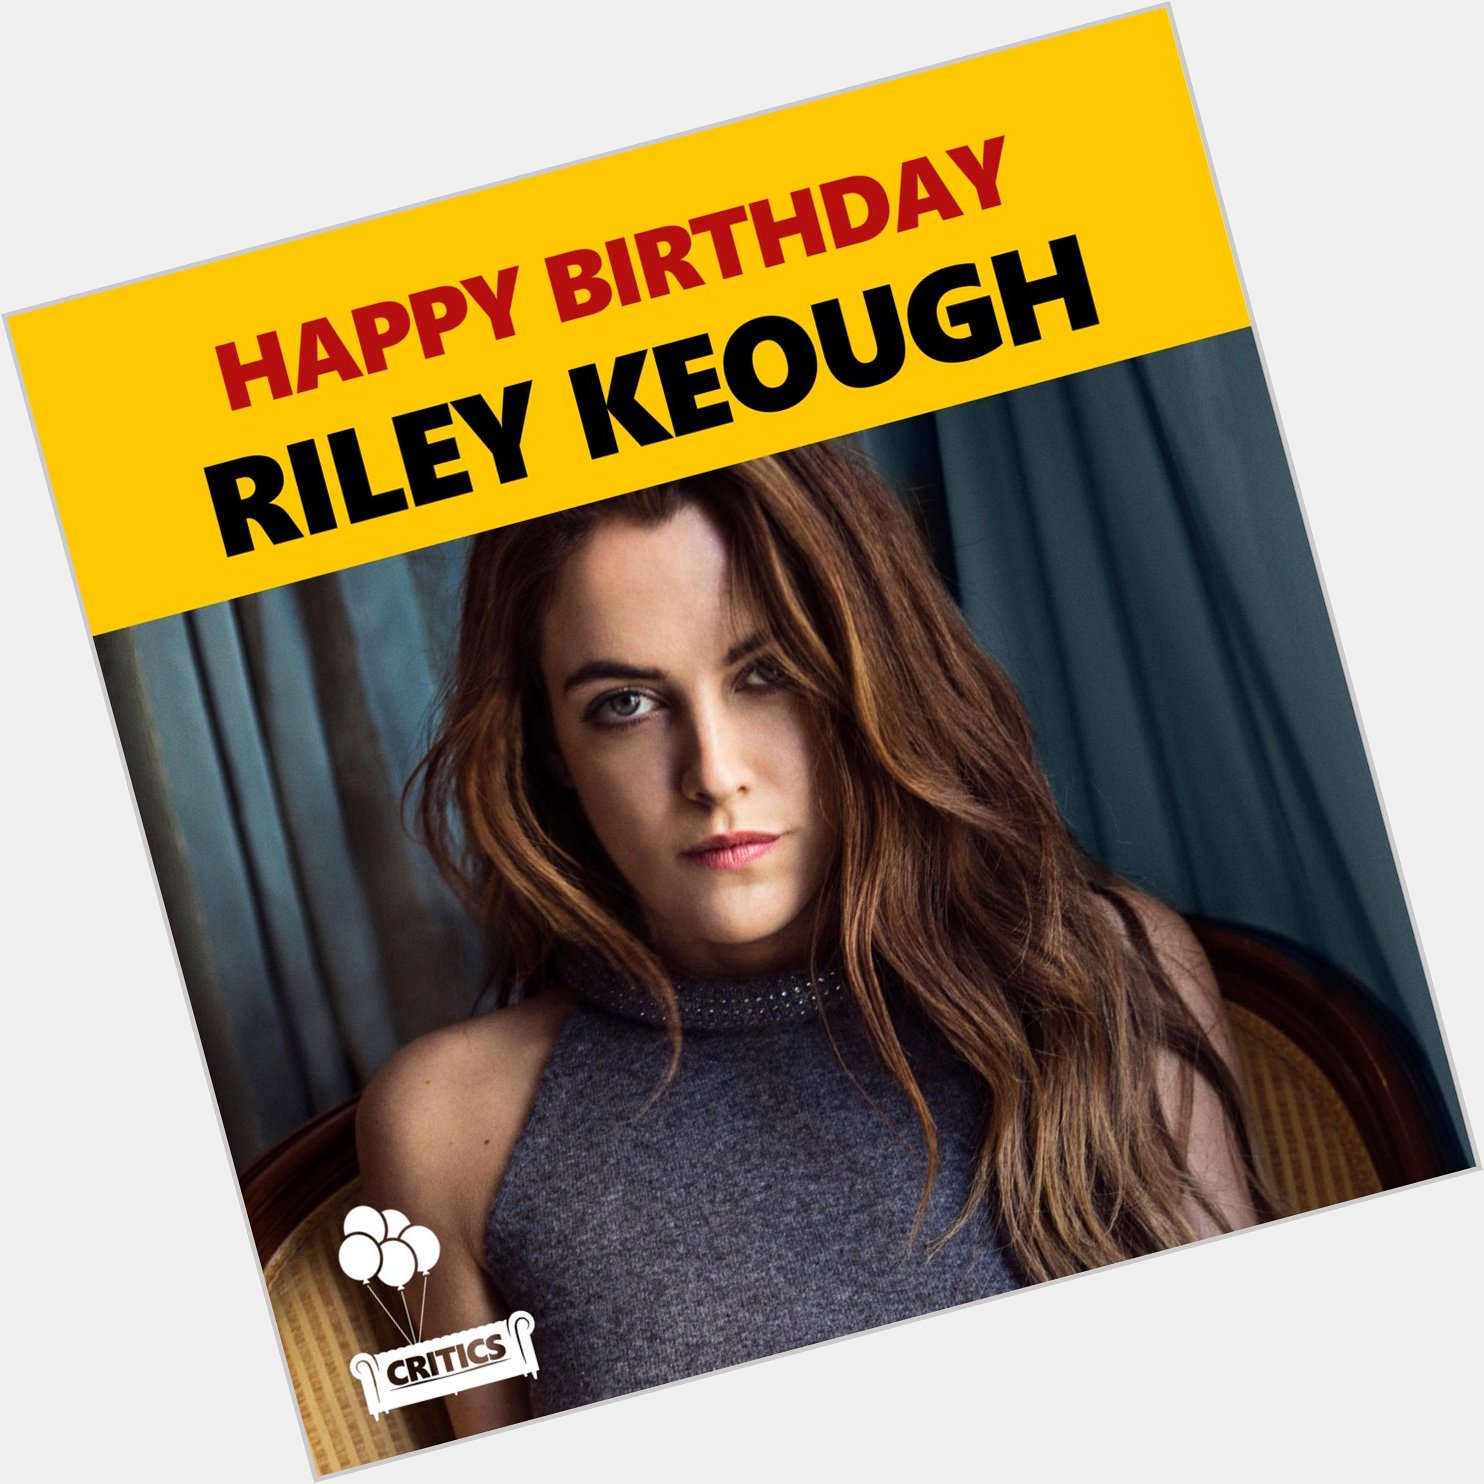 Happy Birthday Riley Keough. The Mad Max actress turns 28 today.  